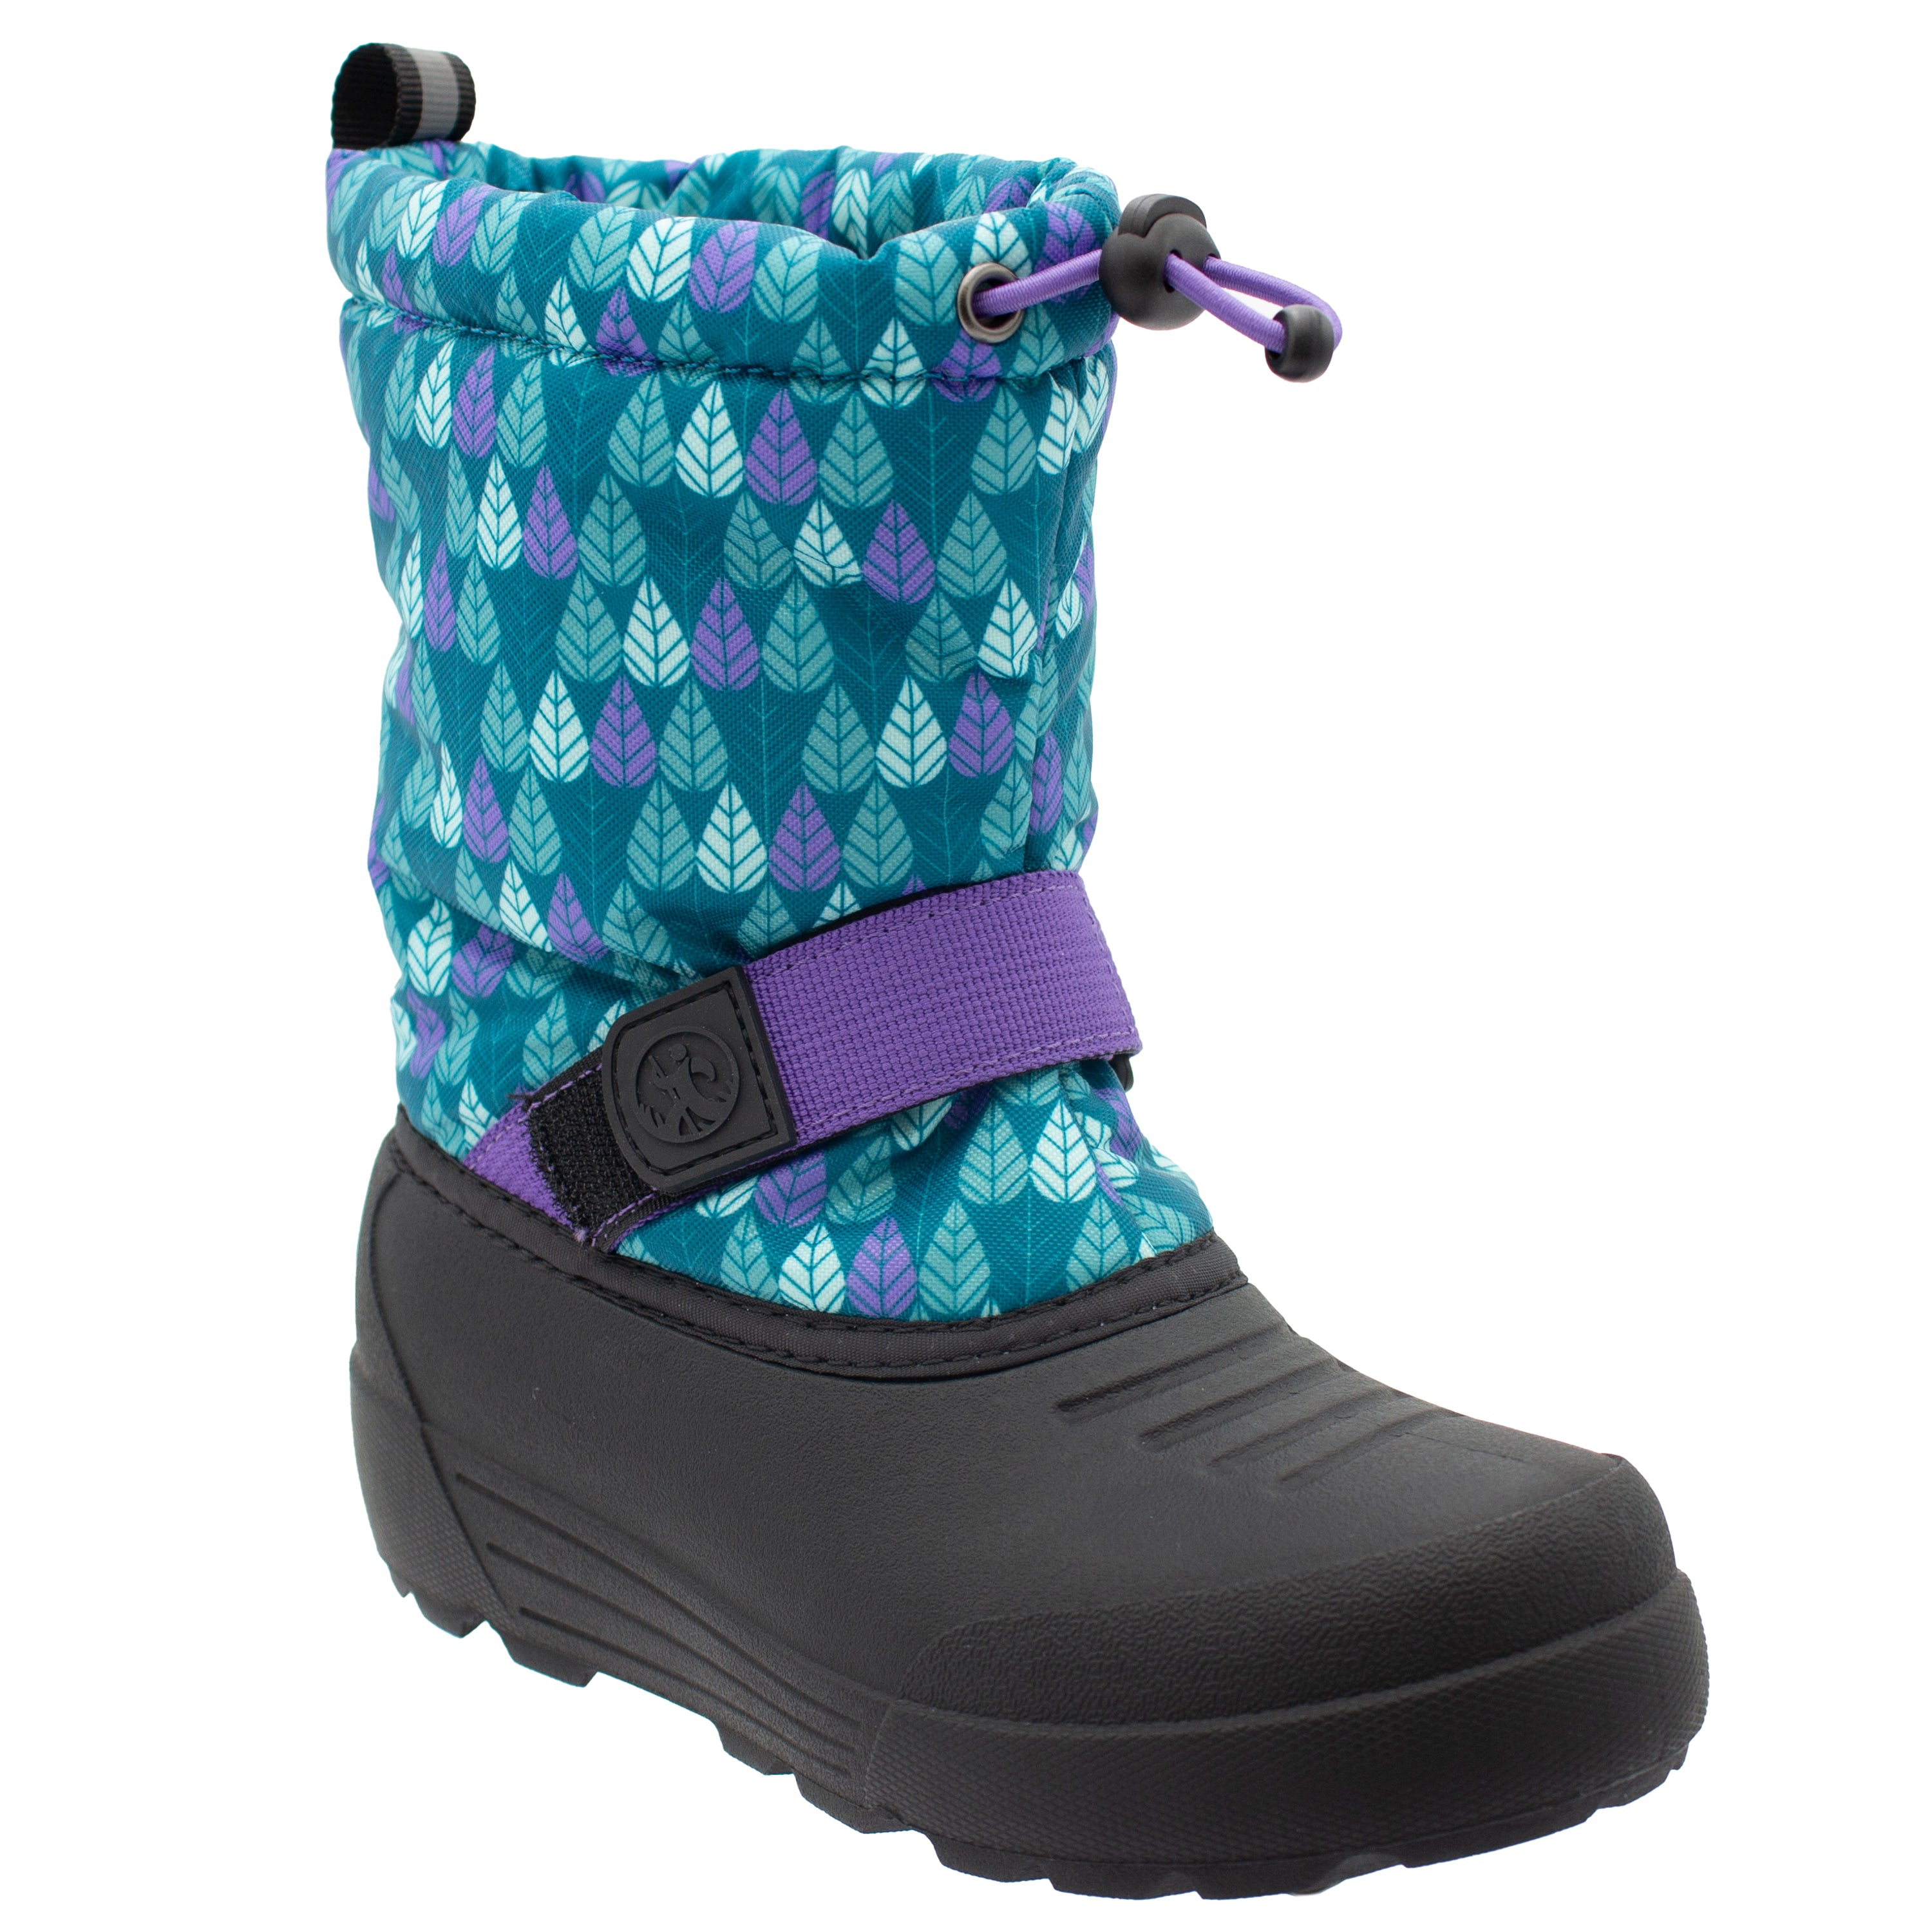 Kid's Frosty Insulated Winter Snow Boot